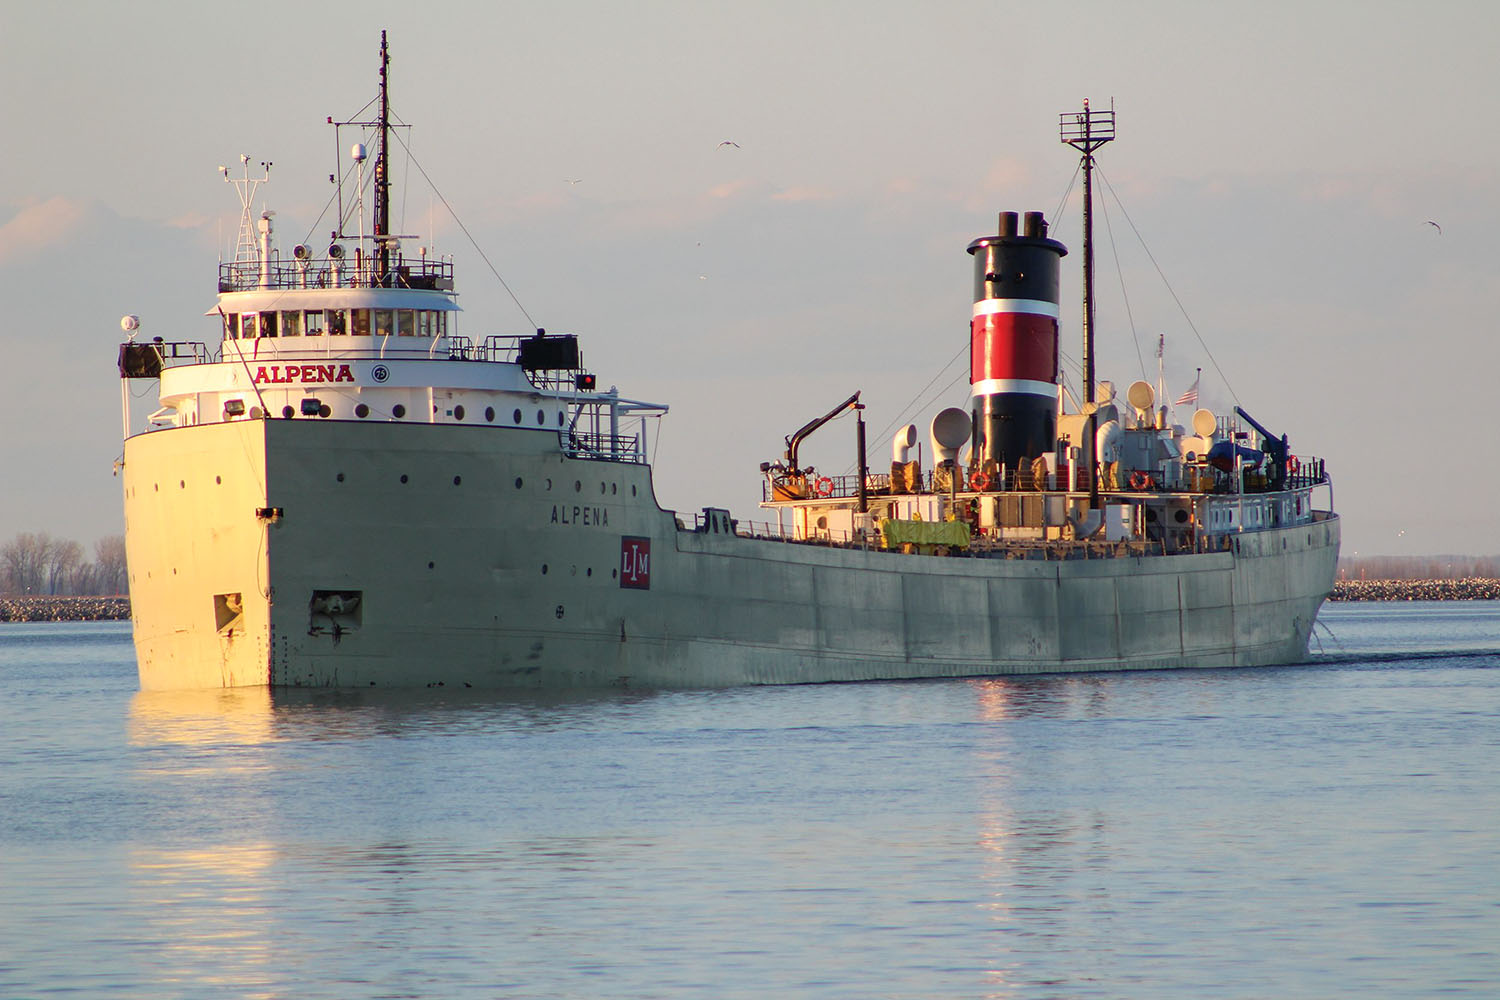 The Alpena arrives at Green Bay, Wis., May 3.